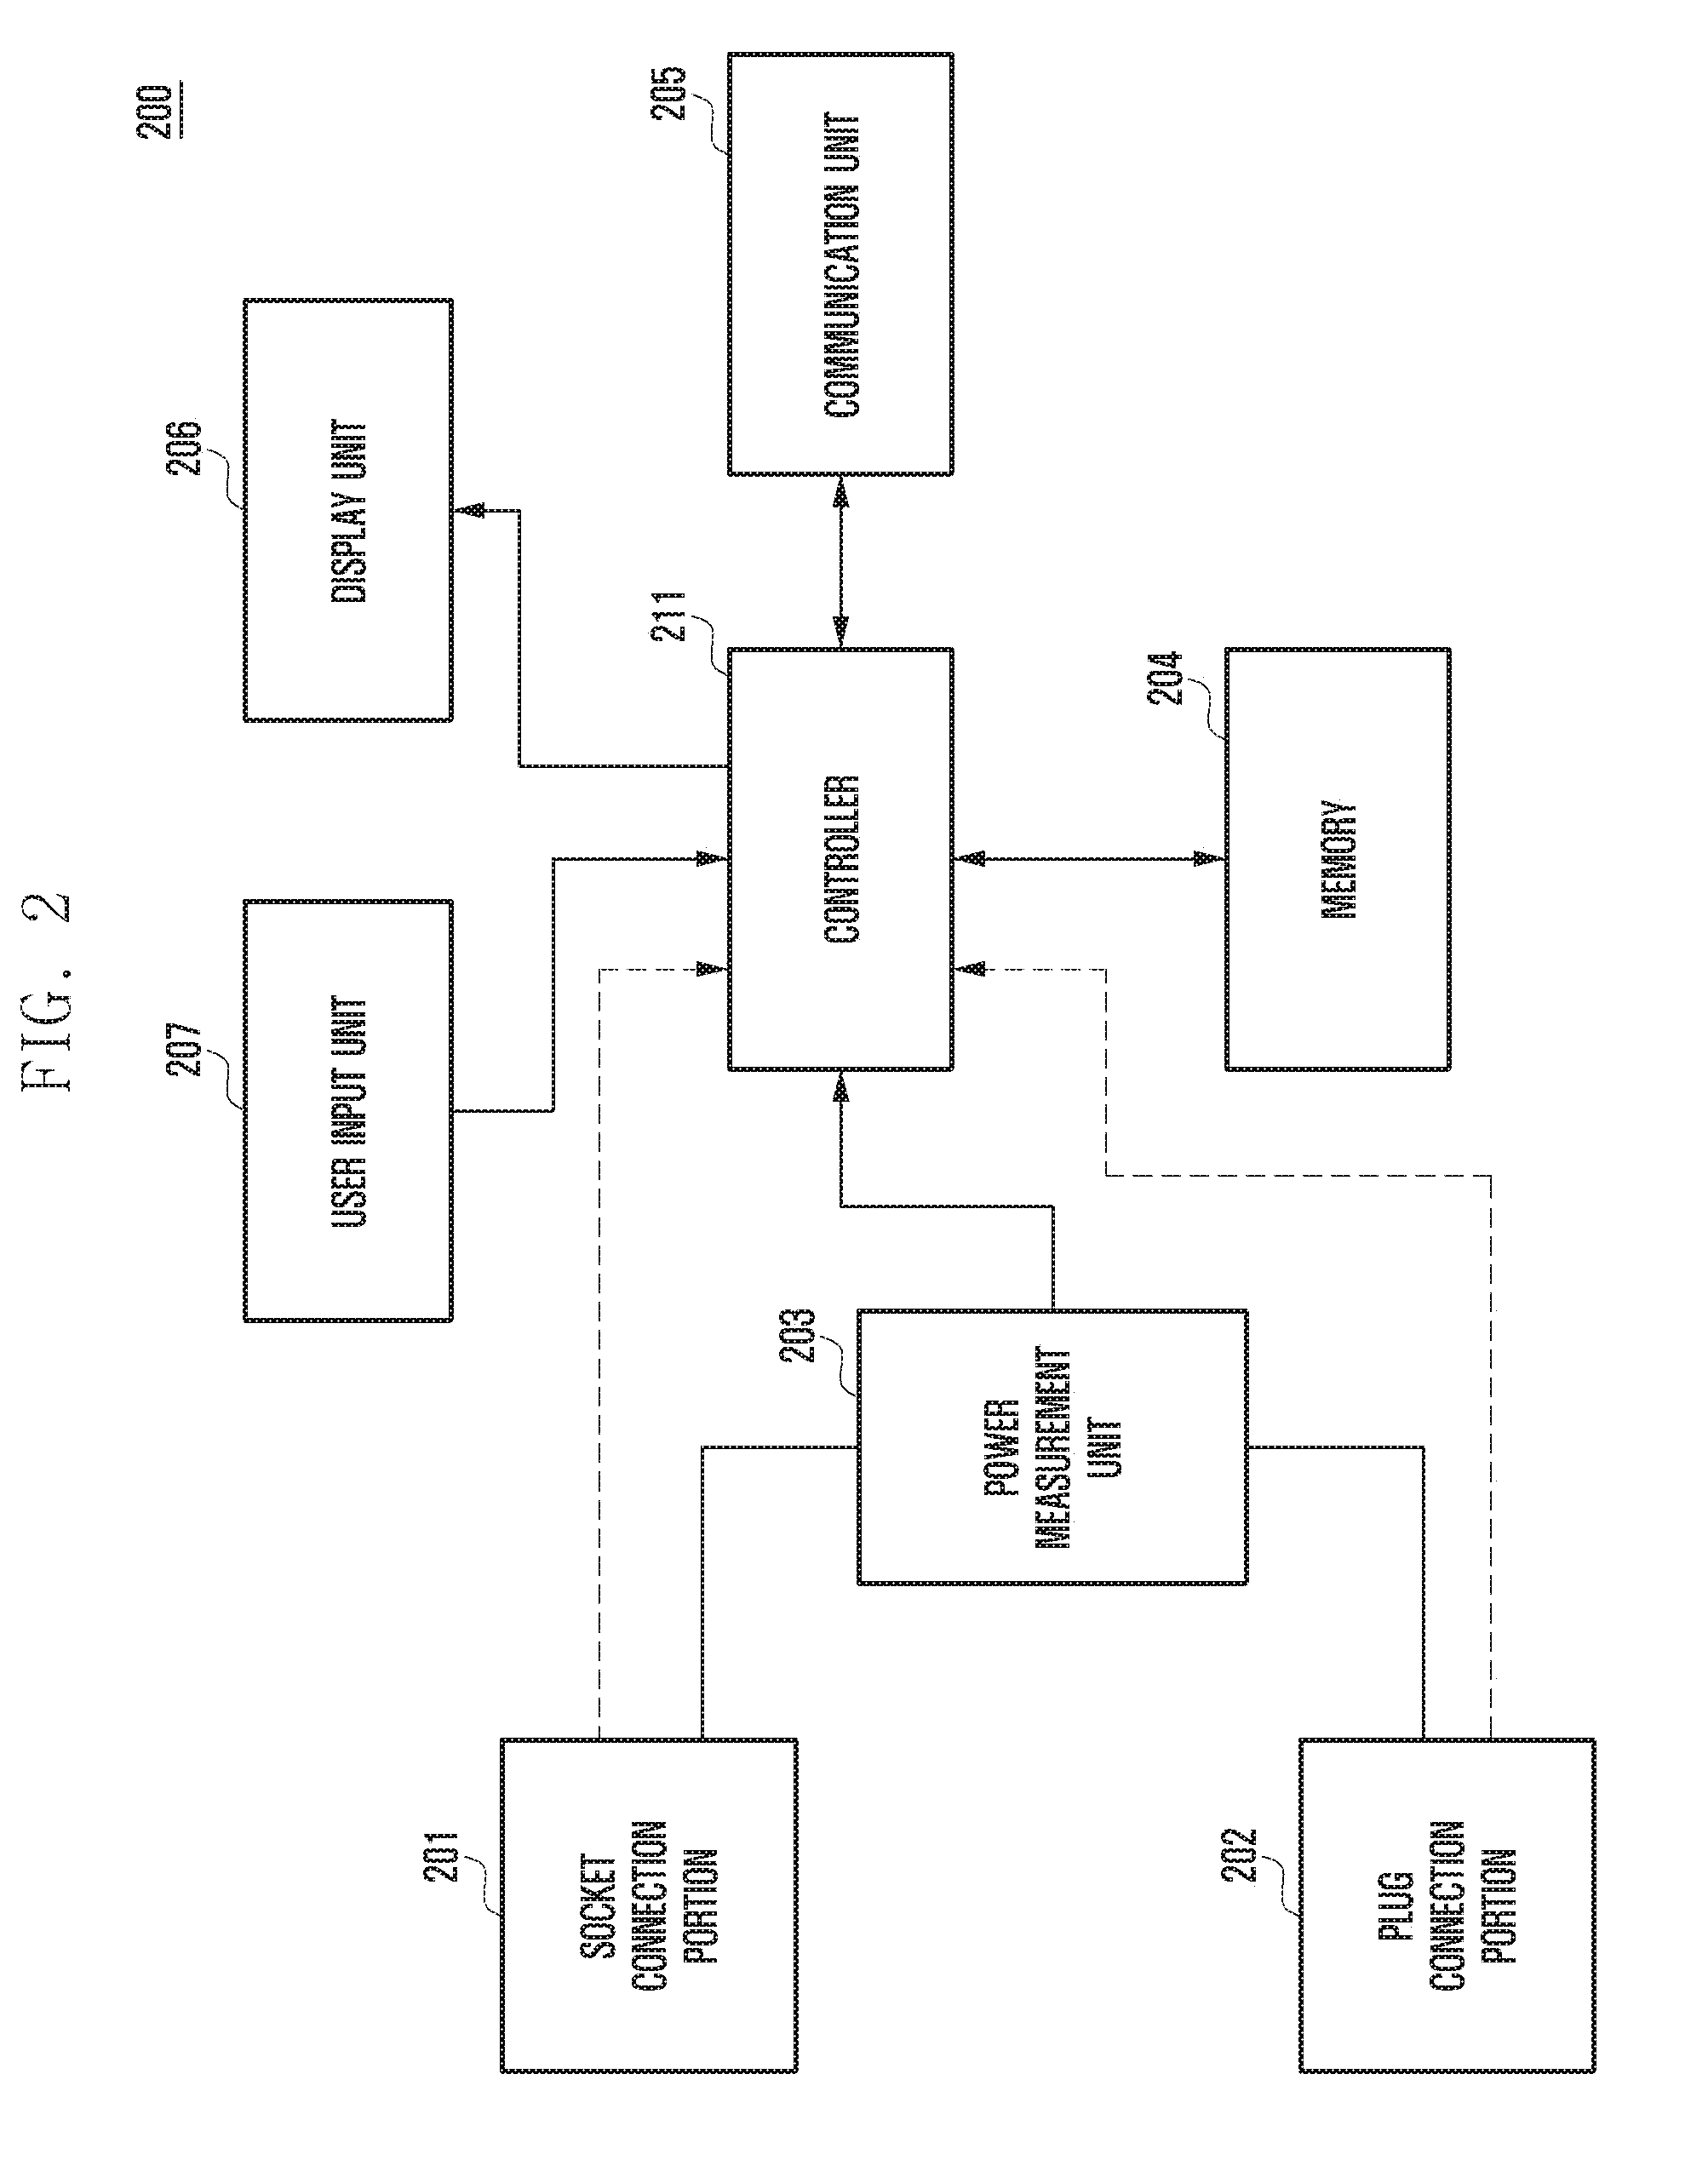 Method and apparatus for detecting electronic device connected to smart plug